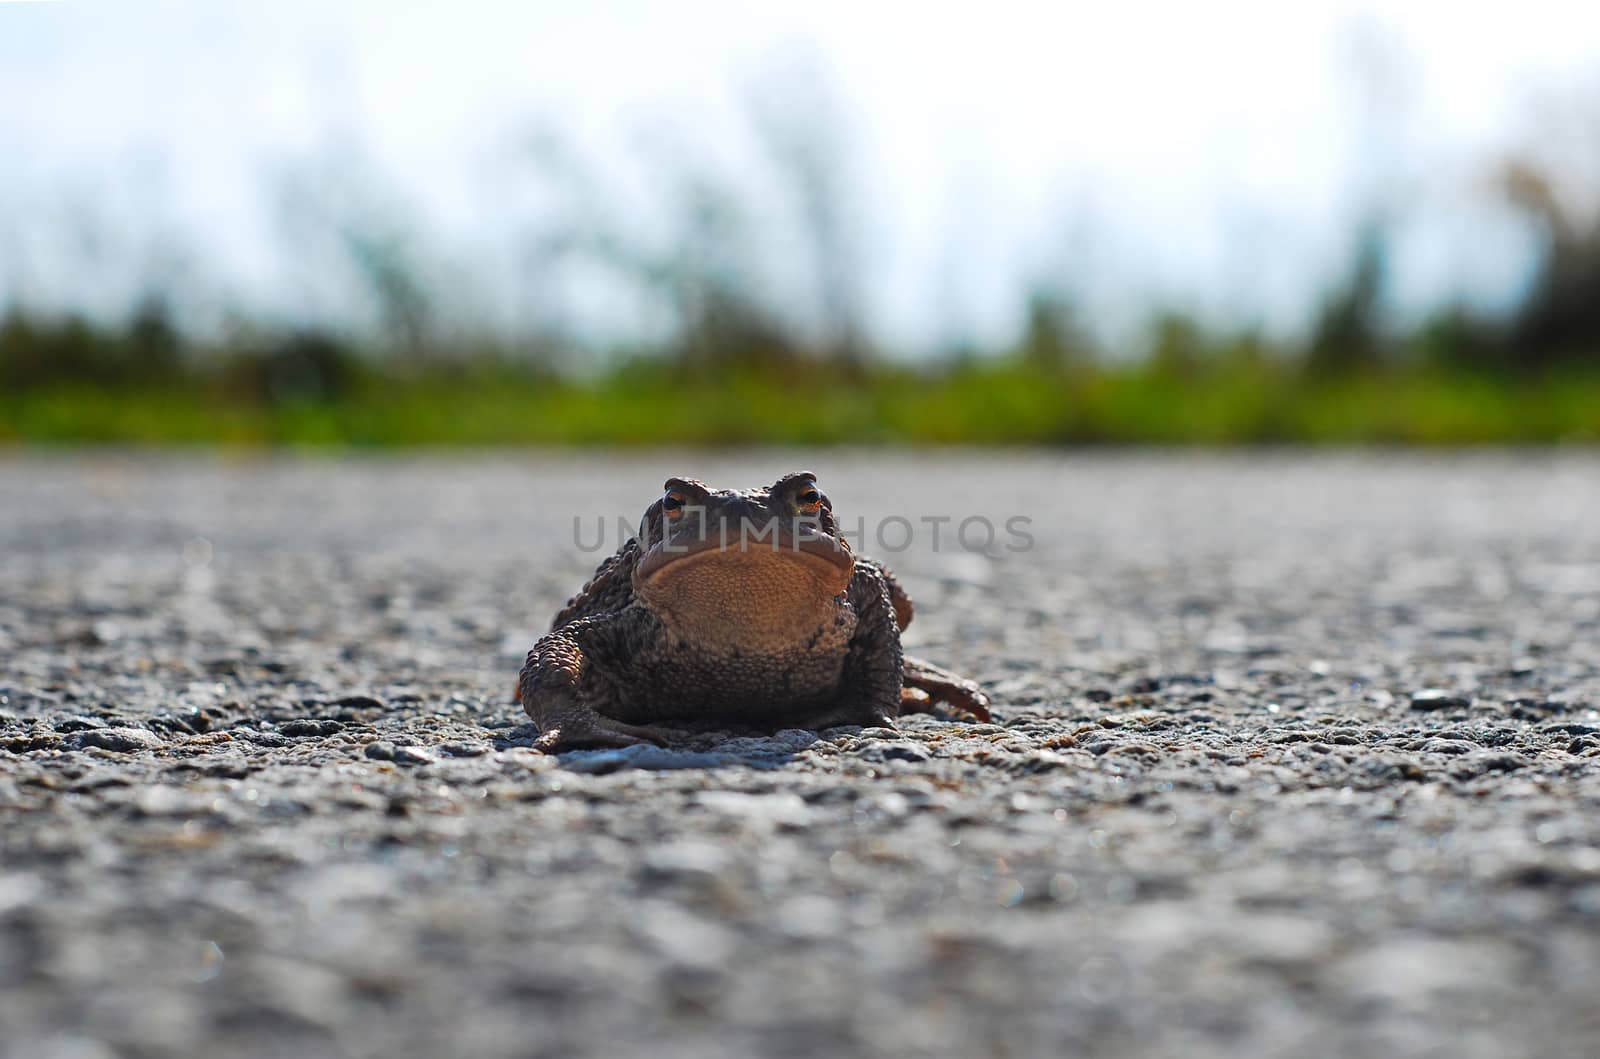 Frog Toad on the road looking right lens, funny but sad